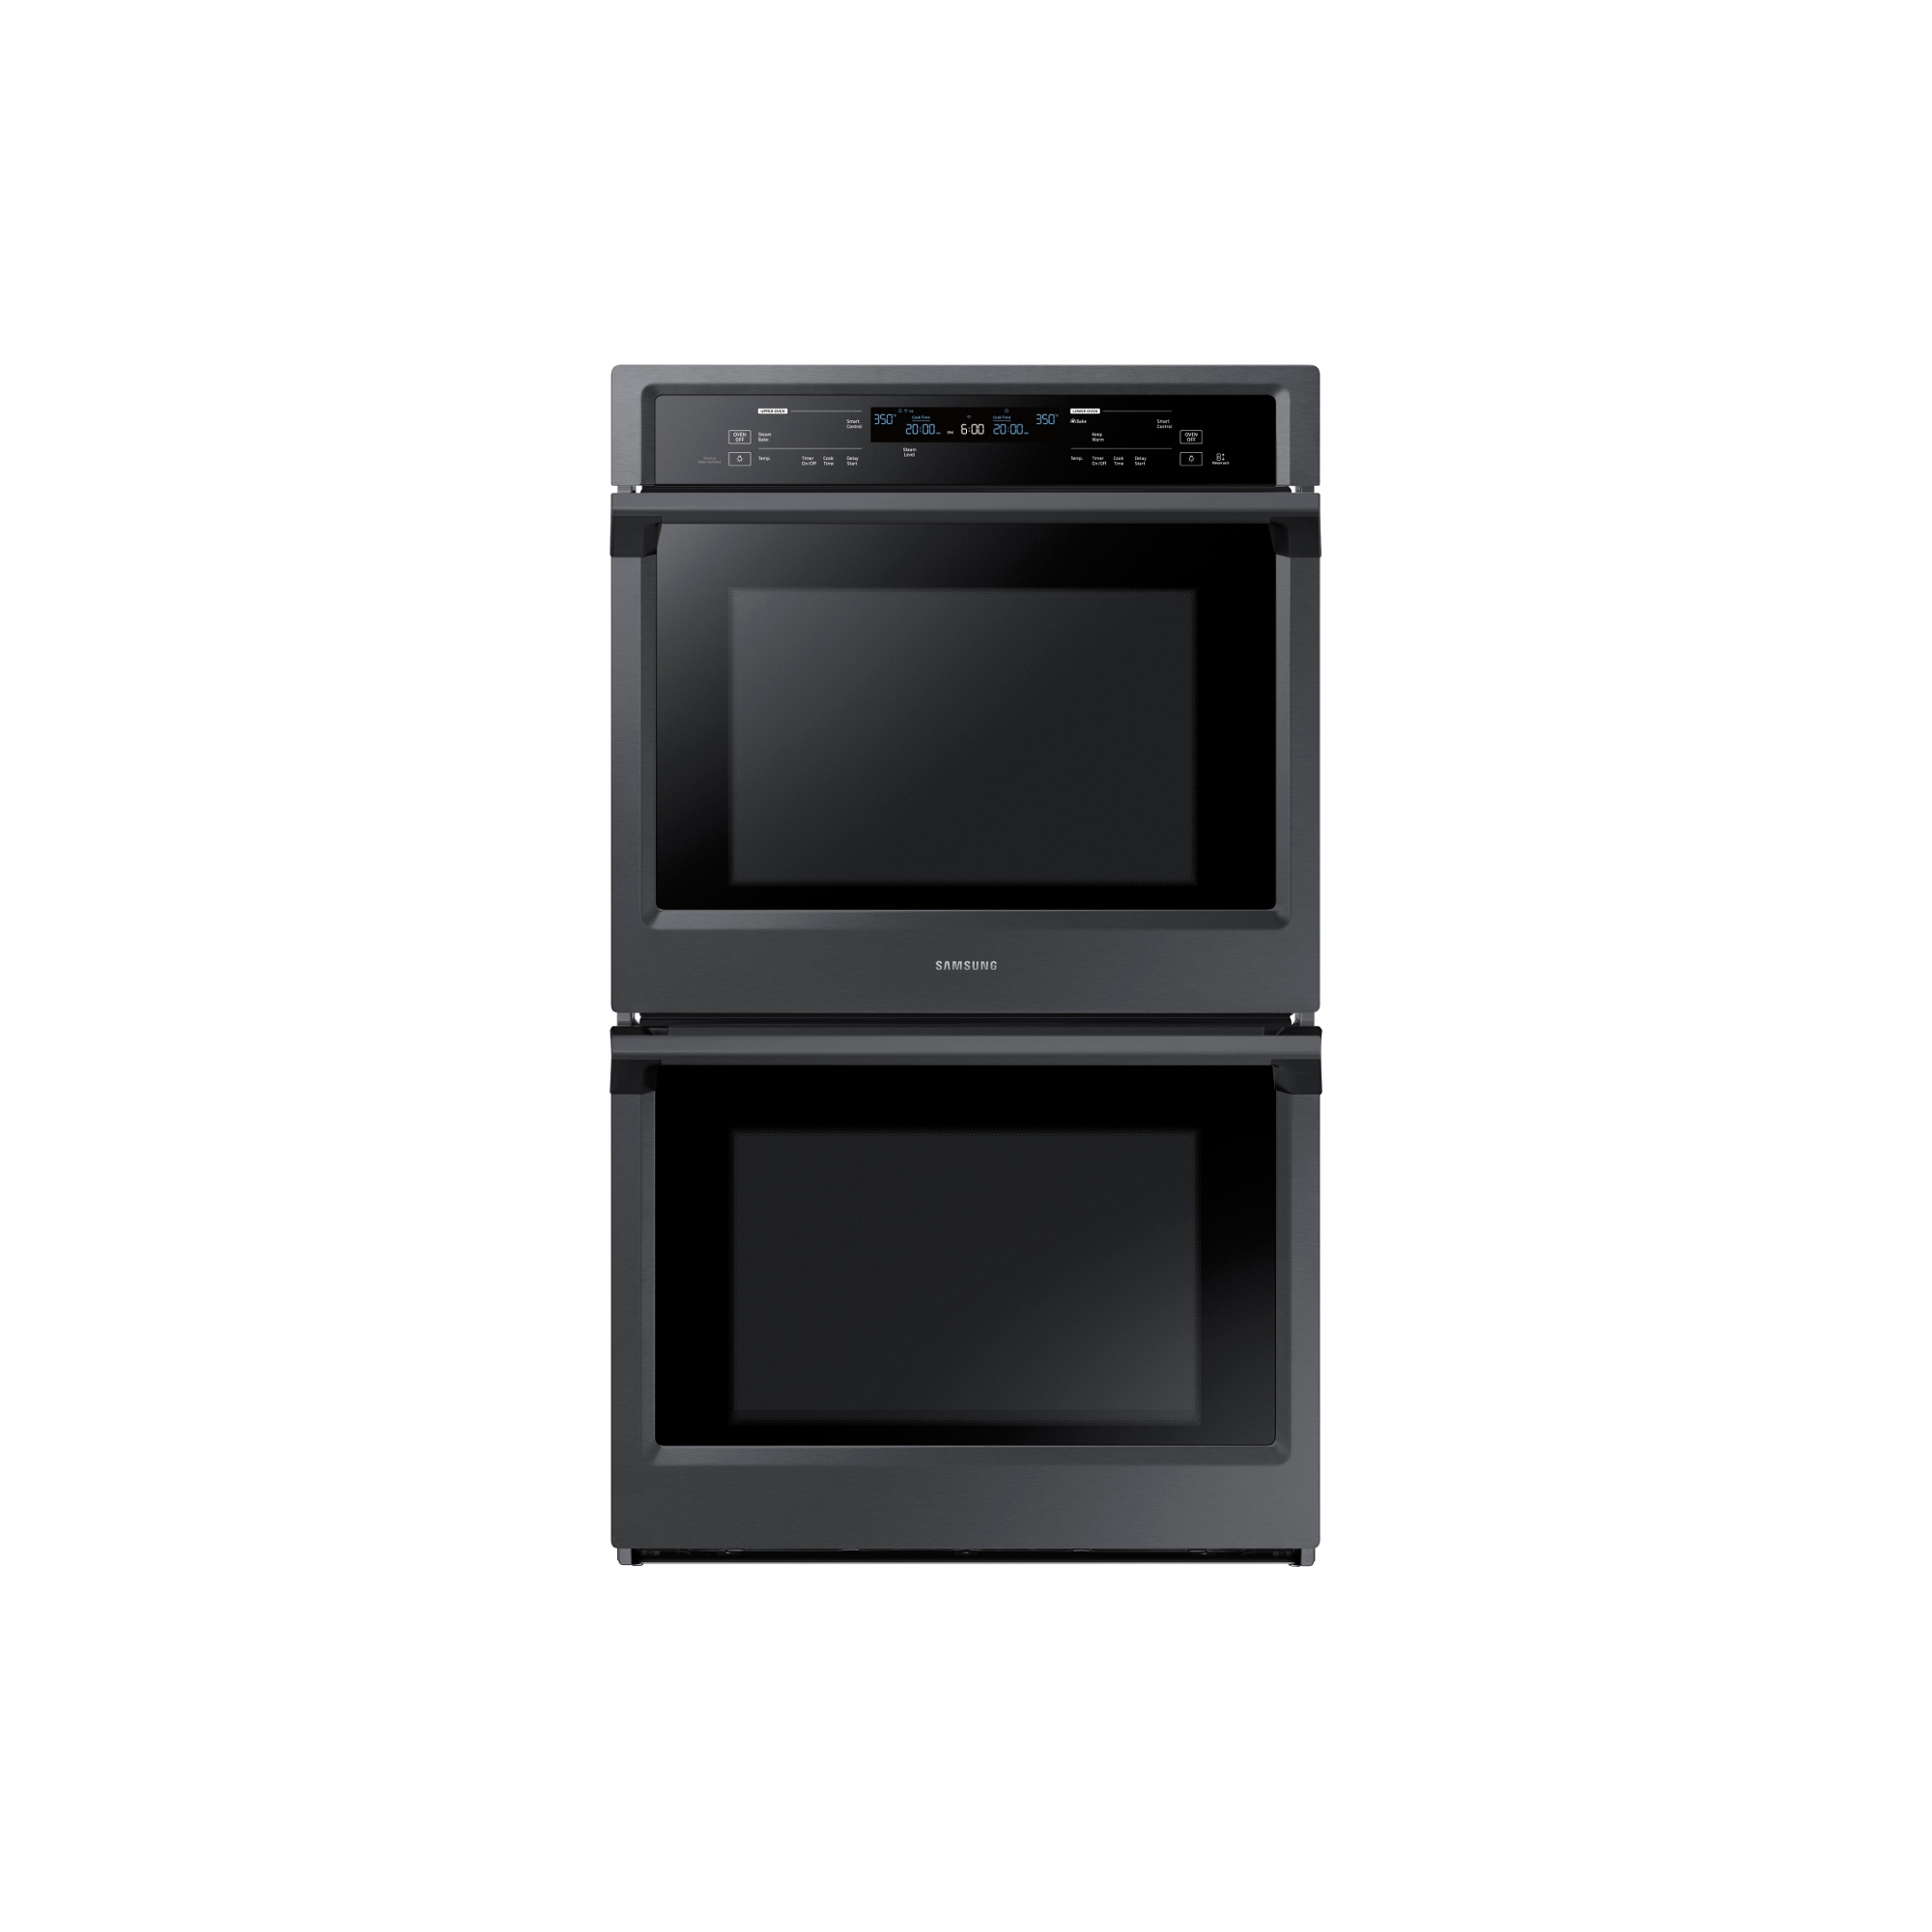 30" Smart Wall Oven with Steam Cook in Black Stainless Steel Oven - NV51K6650DG/AA | Samsung US